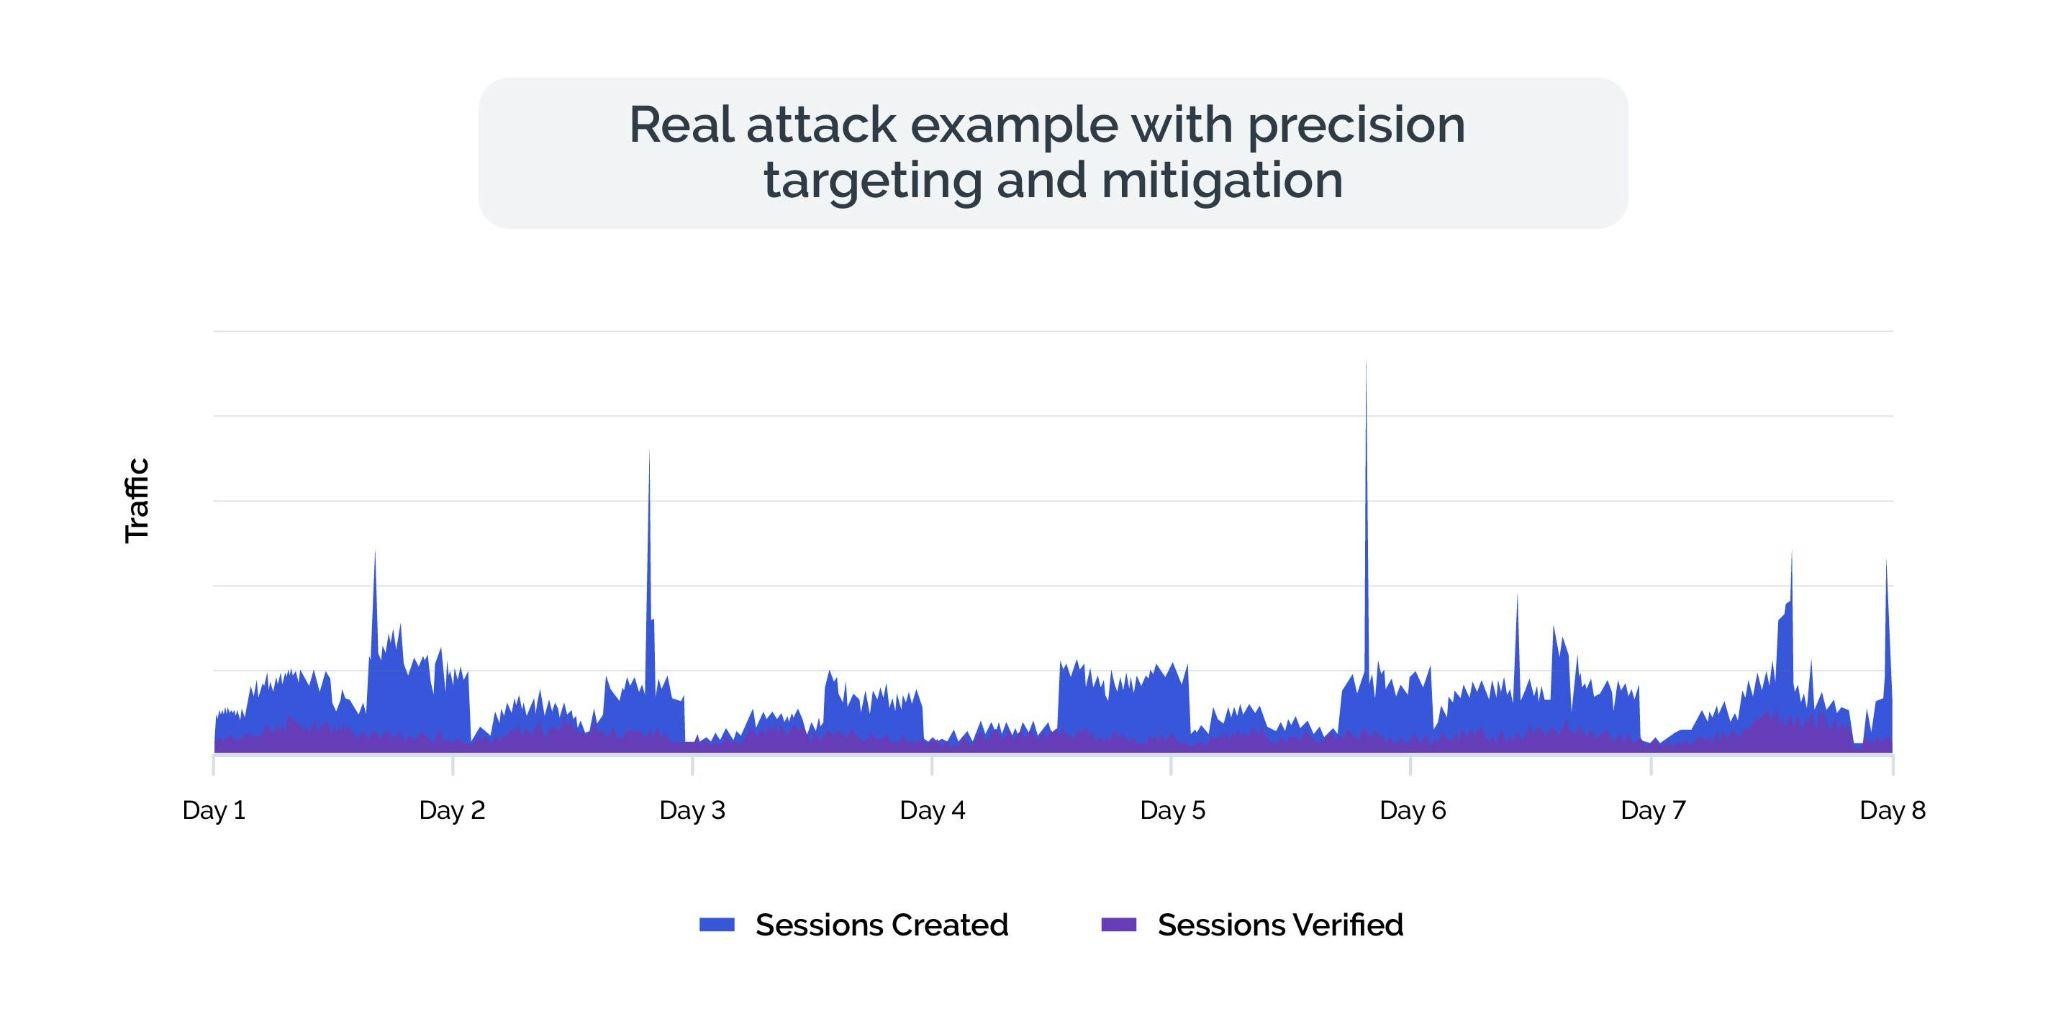 Real attack example with precision targetting and mitigation